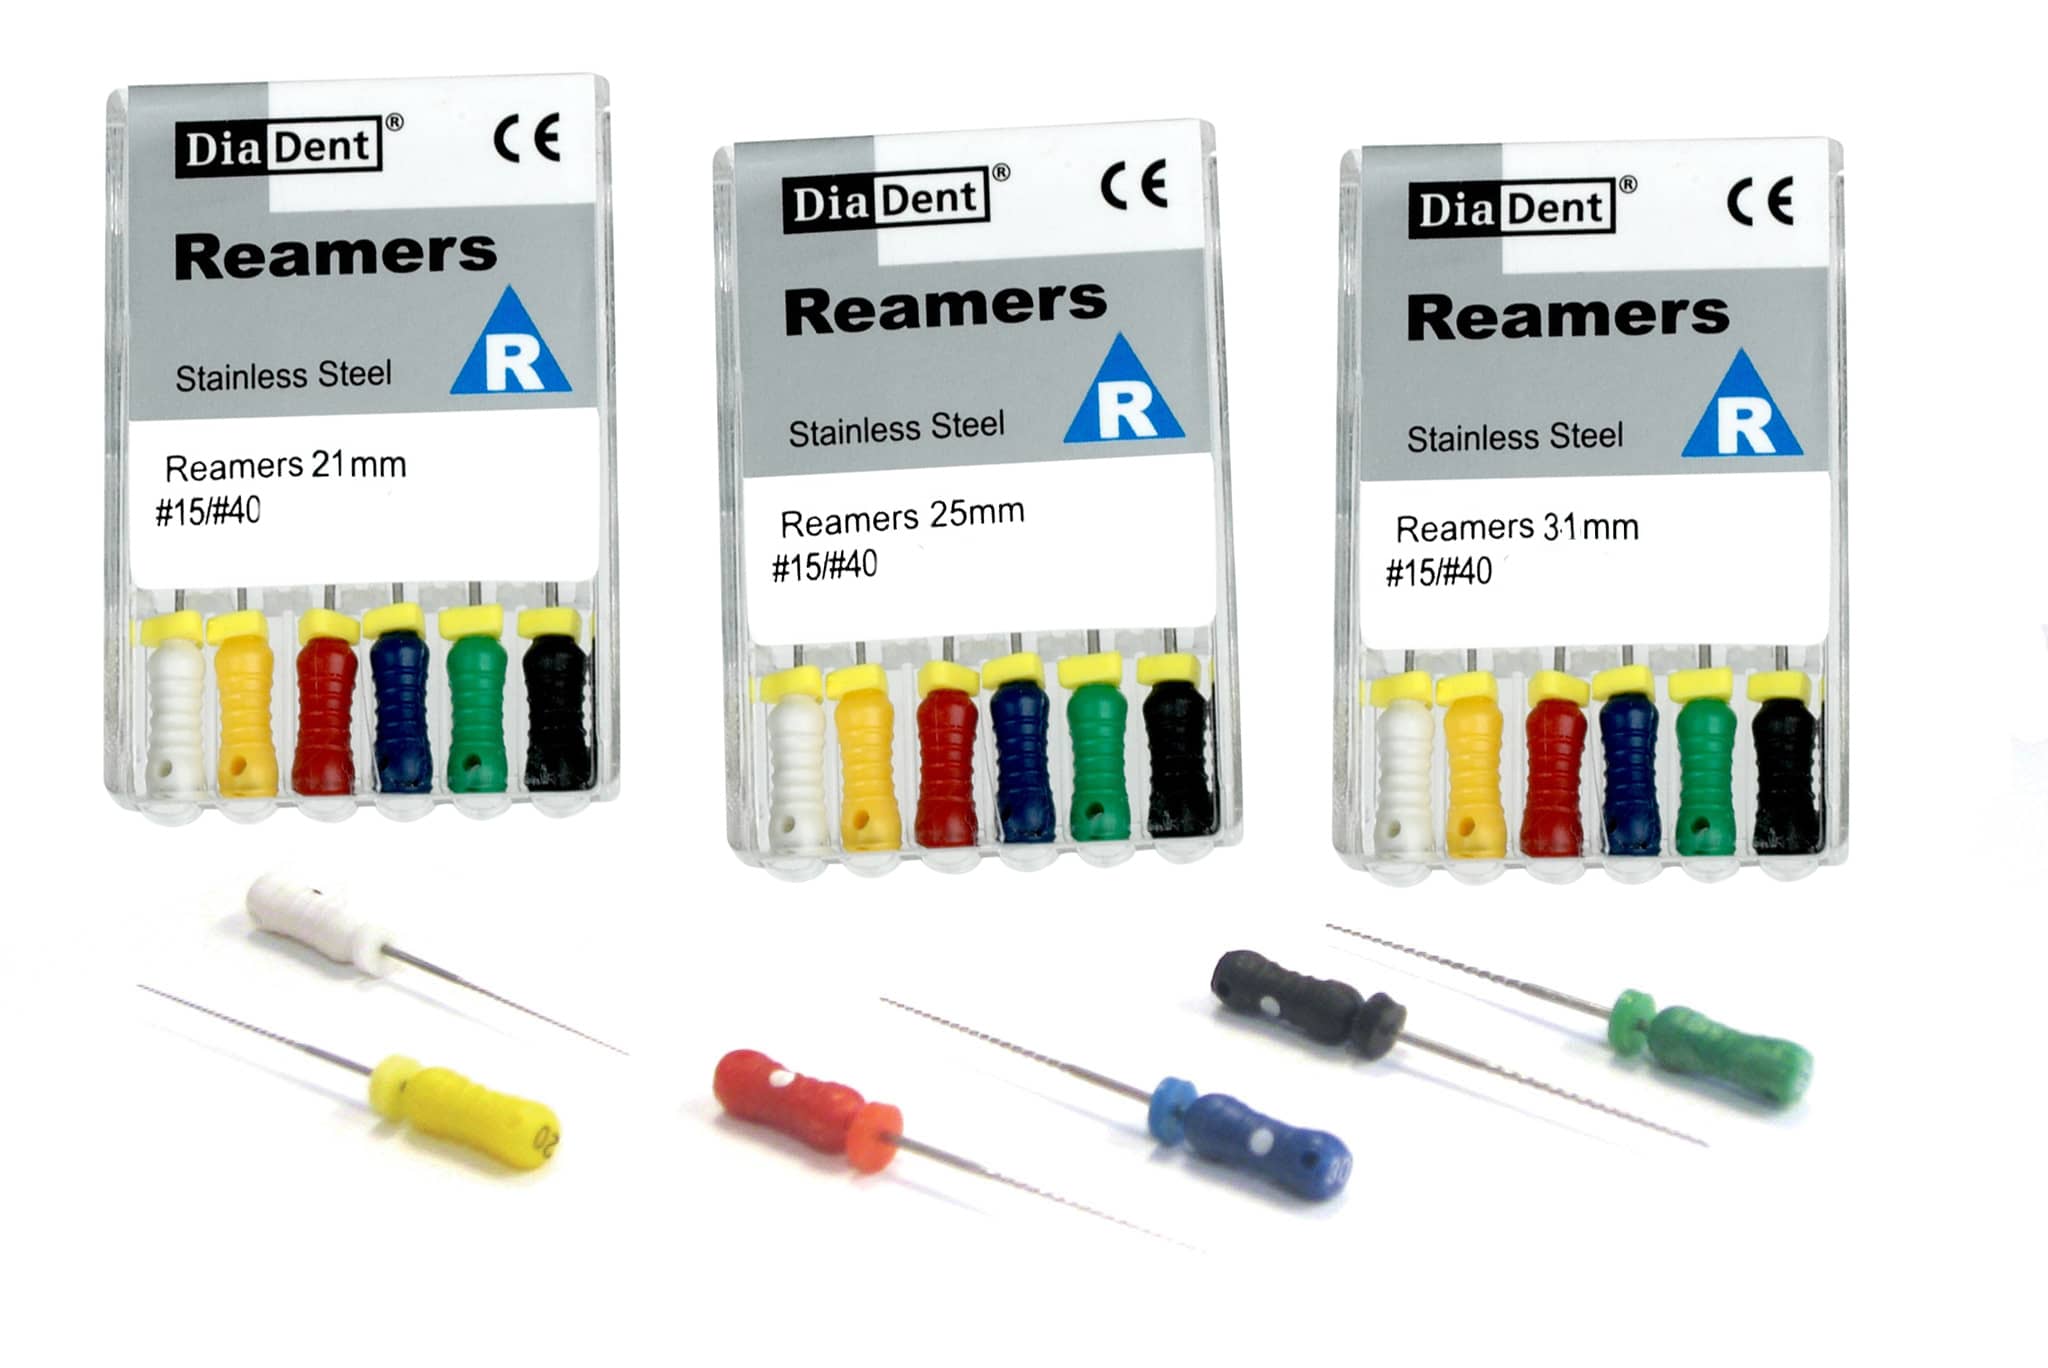 REAMERS Diadent 31mm - 20